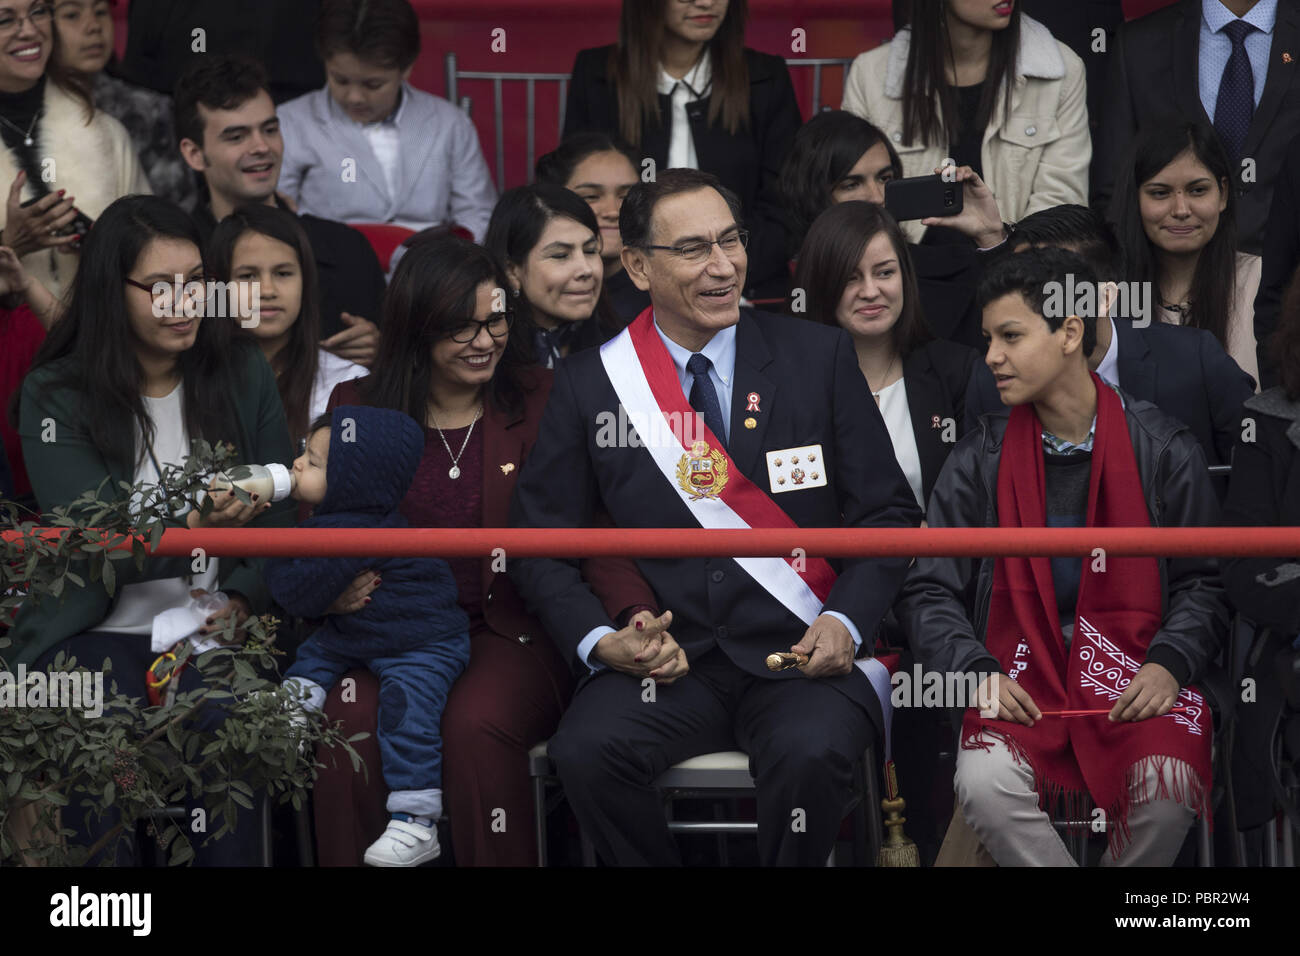 Lima, Lima, Peru. 29th July, 2018. Peru's President Martin Vizcarra seen at the military parade.Members of Peru's armed forces, coastguard, search & rescue, and police march in full uniform during the country's Gran Parada Militar. This parade always occurs the day after Peru's Independence Day marking the official end of festivities across the nation. Credit: Guillermo Gutierrez/SOPA Images/ZUMA Wire/Alamy Live News Stock Photo